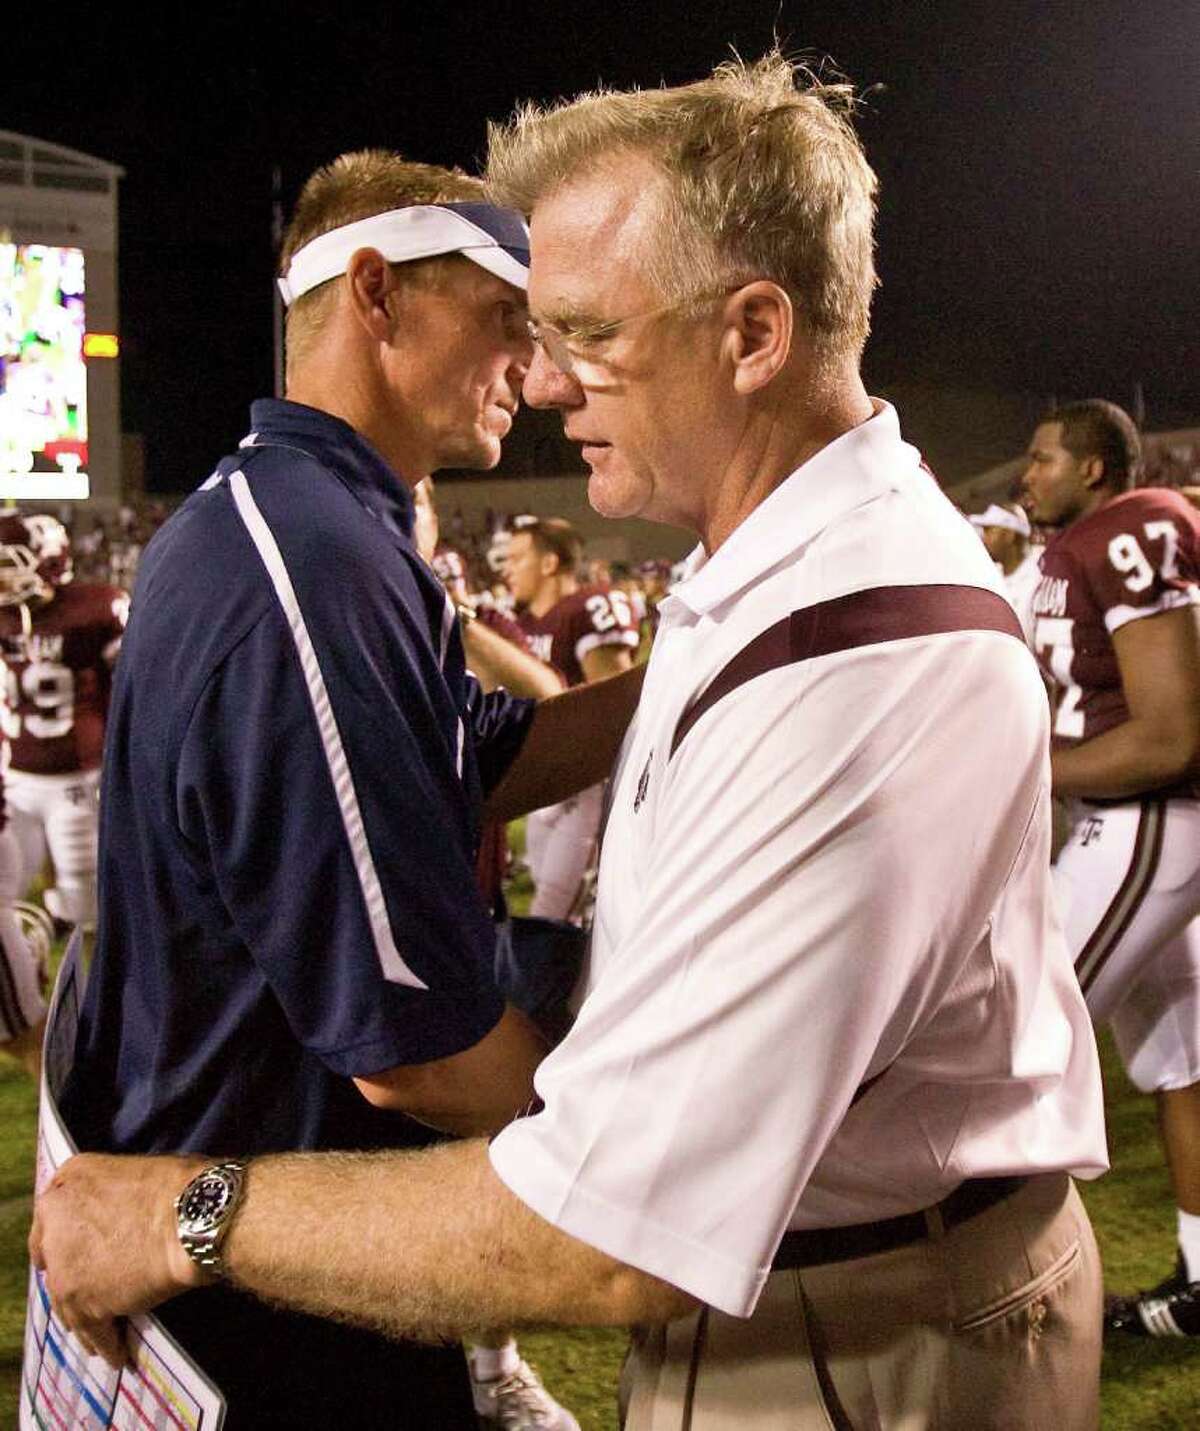 Utah State head coach Gary Andersen, left, congratulates Texas A&M head coach Mike Sherman after their game Saturday, Sept. 19, 2008, in Kyle Field in College Station. Texas A&M won 38-30. ( Nick de la Torre / Chronicle )